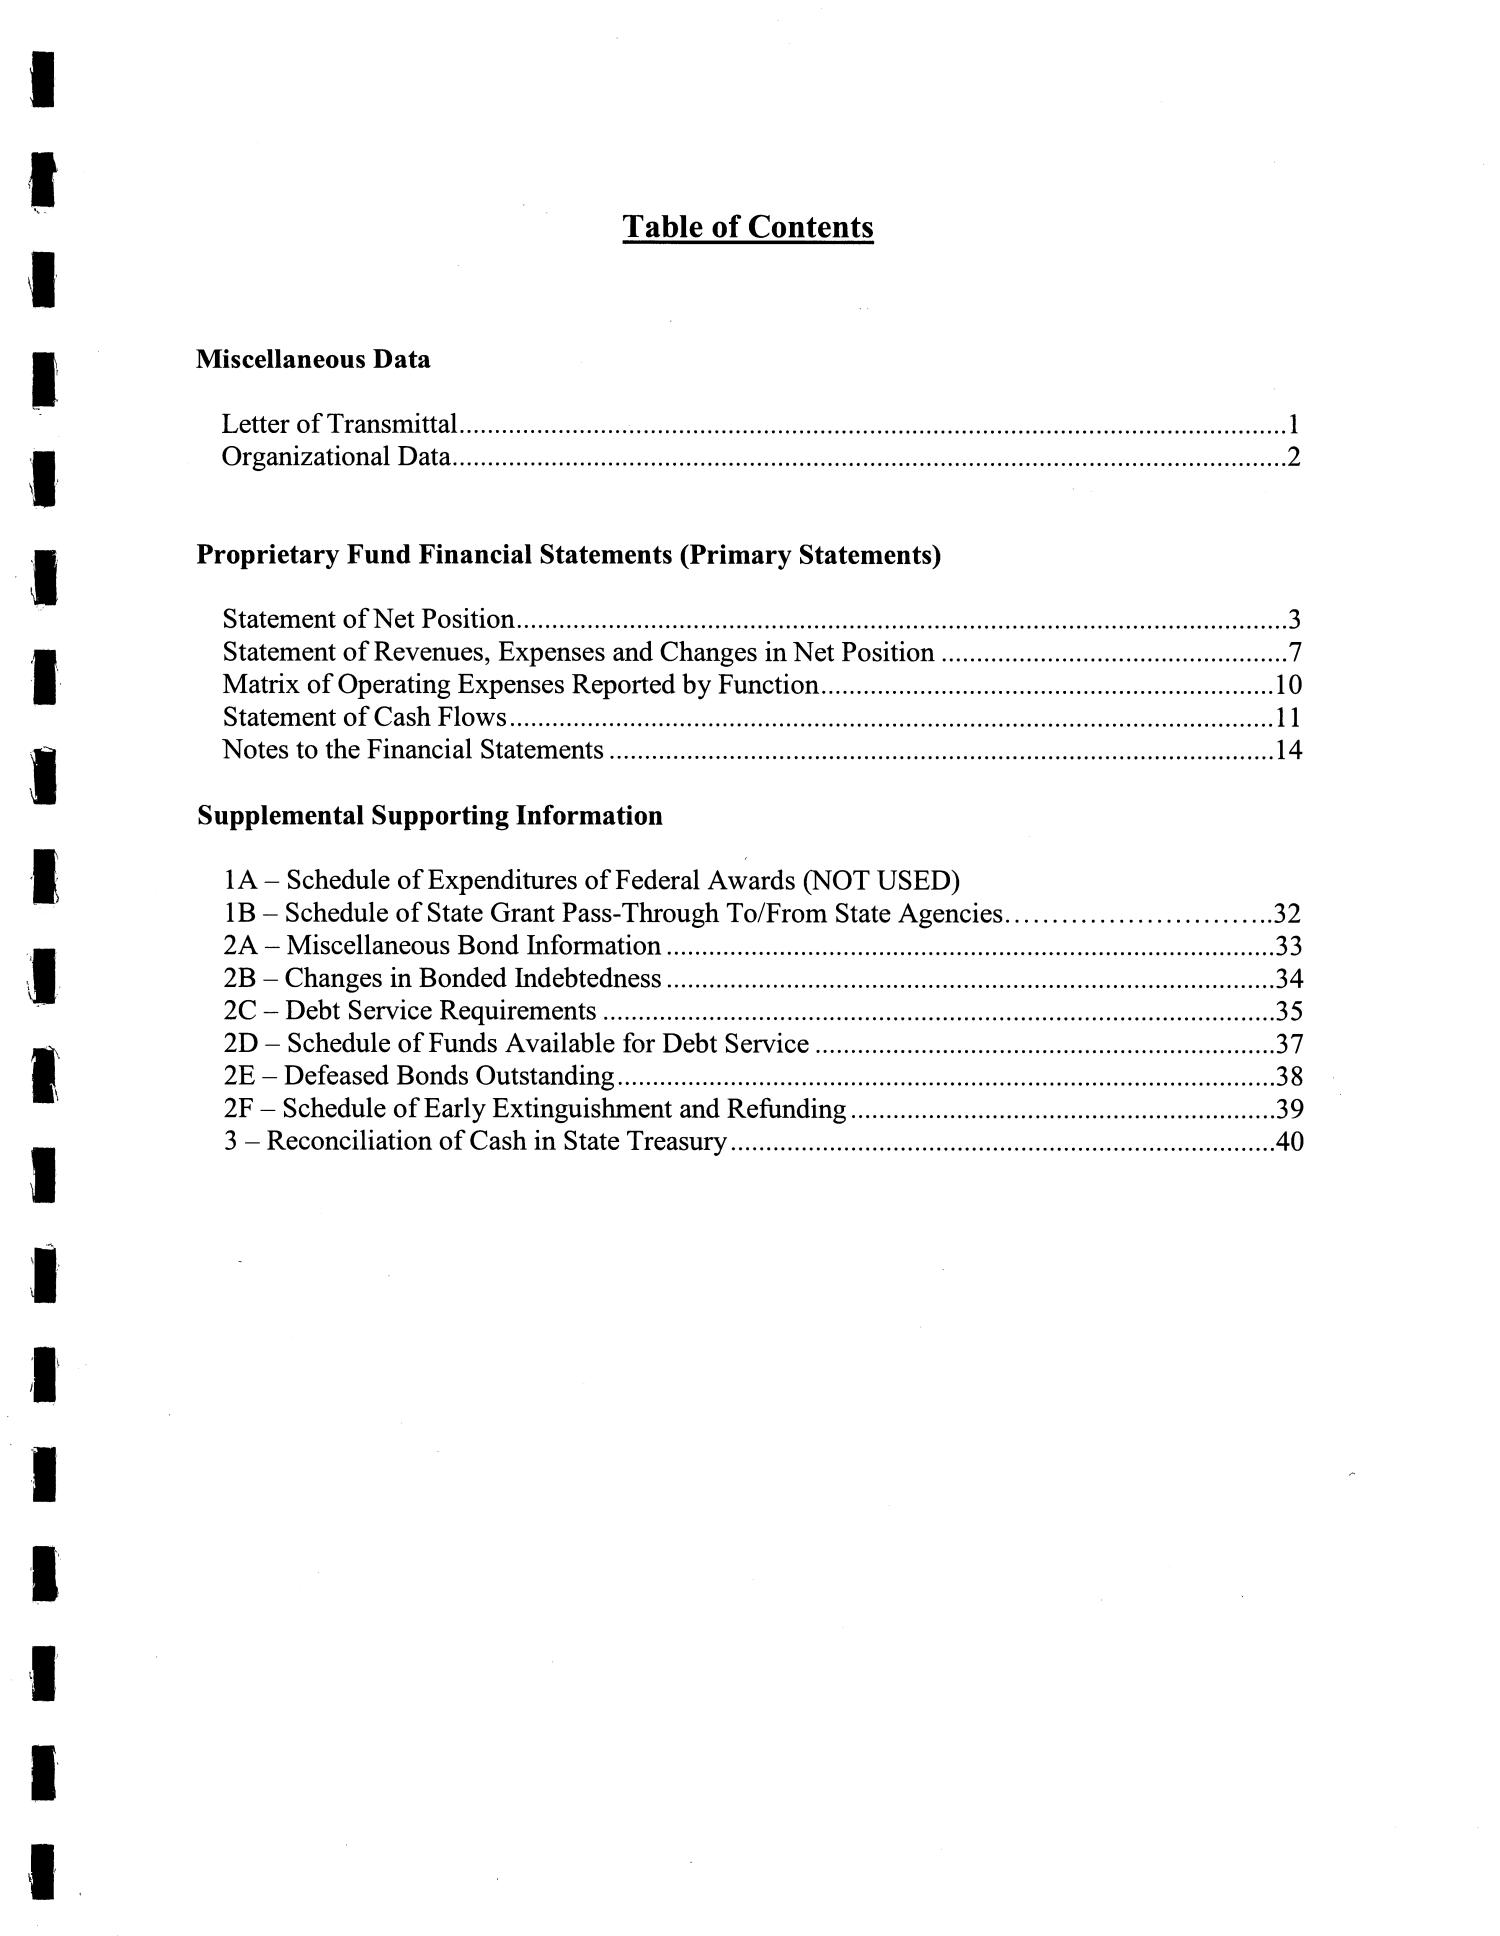 Texas State University System Administration Annual Financial Report: 2013
                                                
                                                    Table Of Contents
                                                